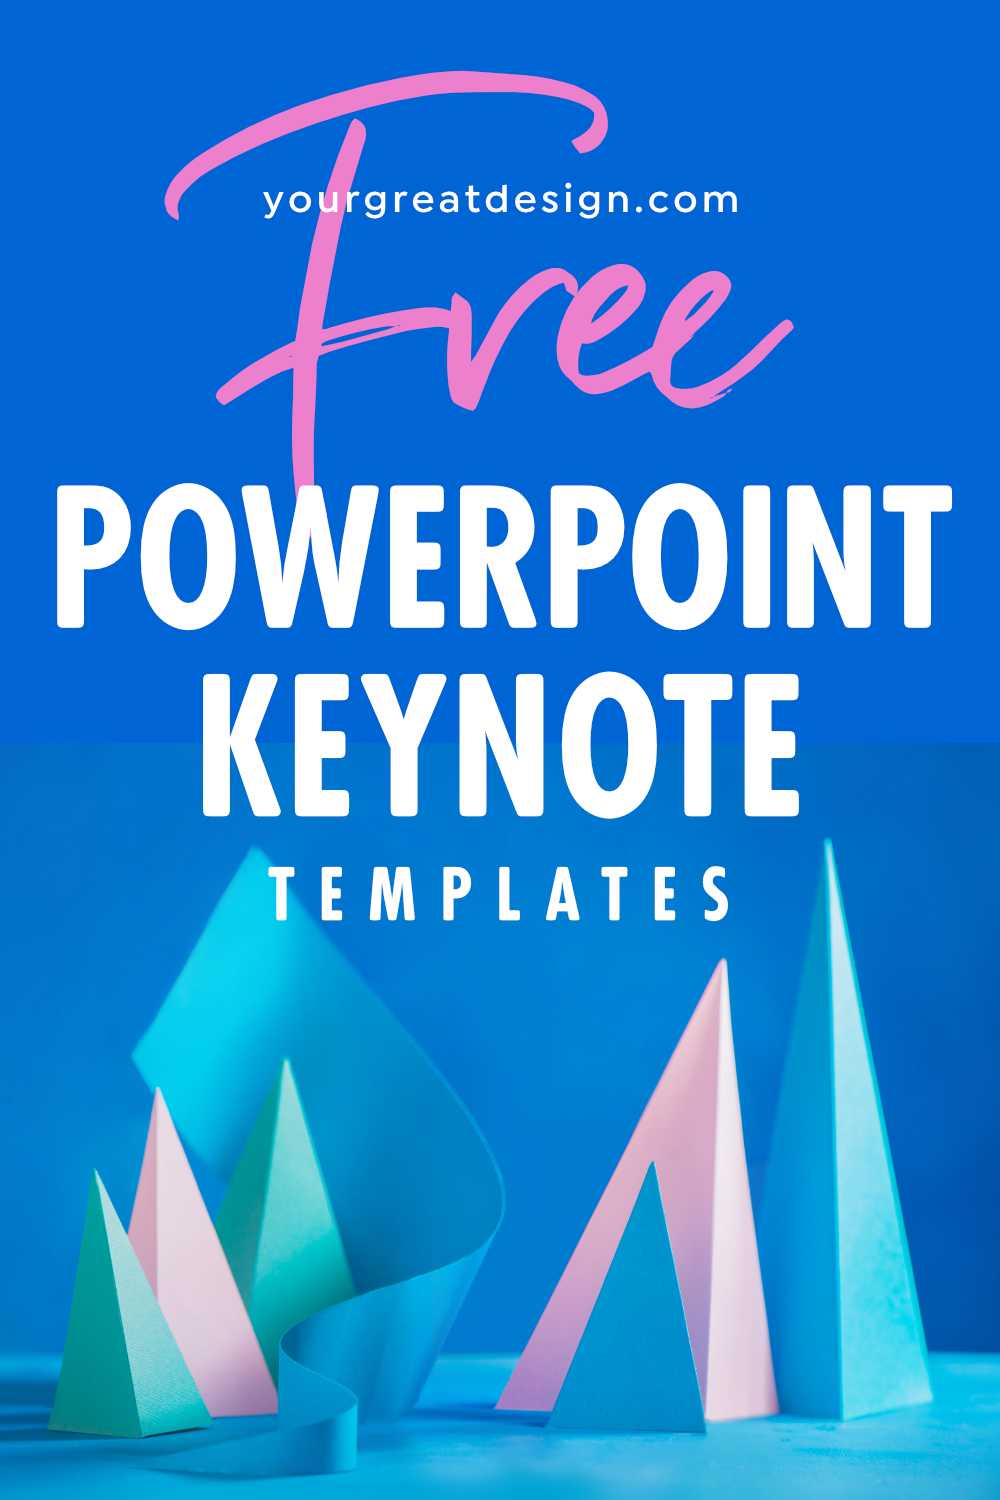 Free PowerPoint & Keynote Templates – Available for Commercial Use